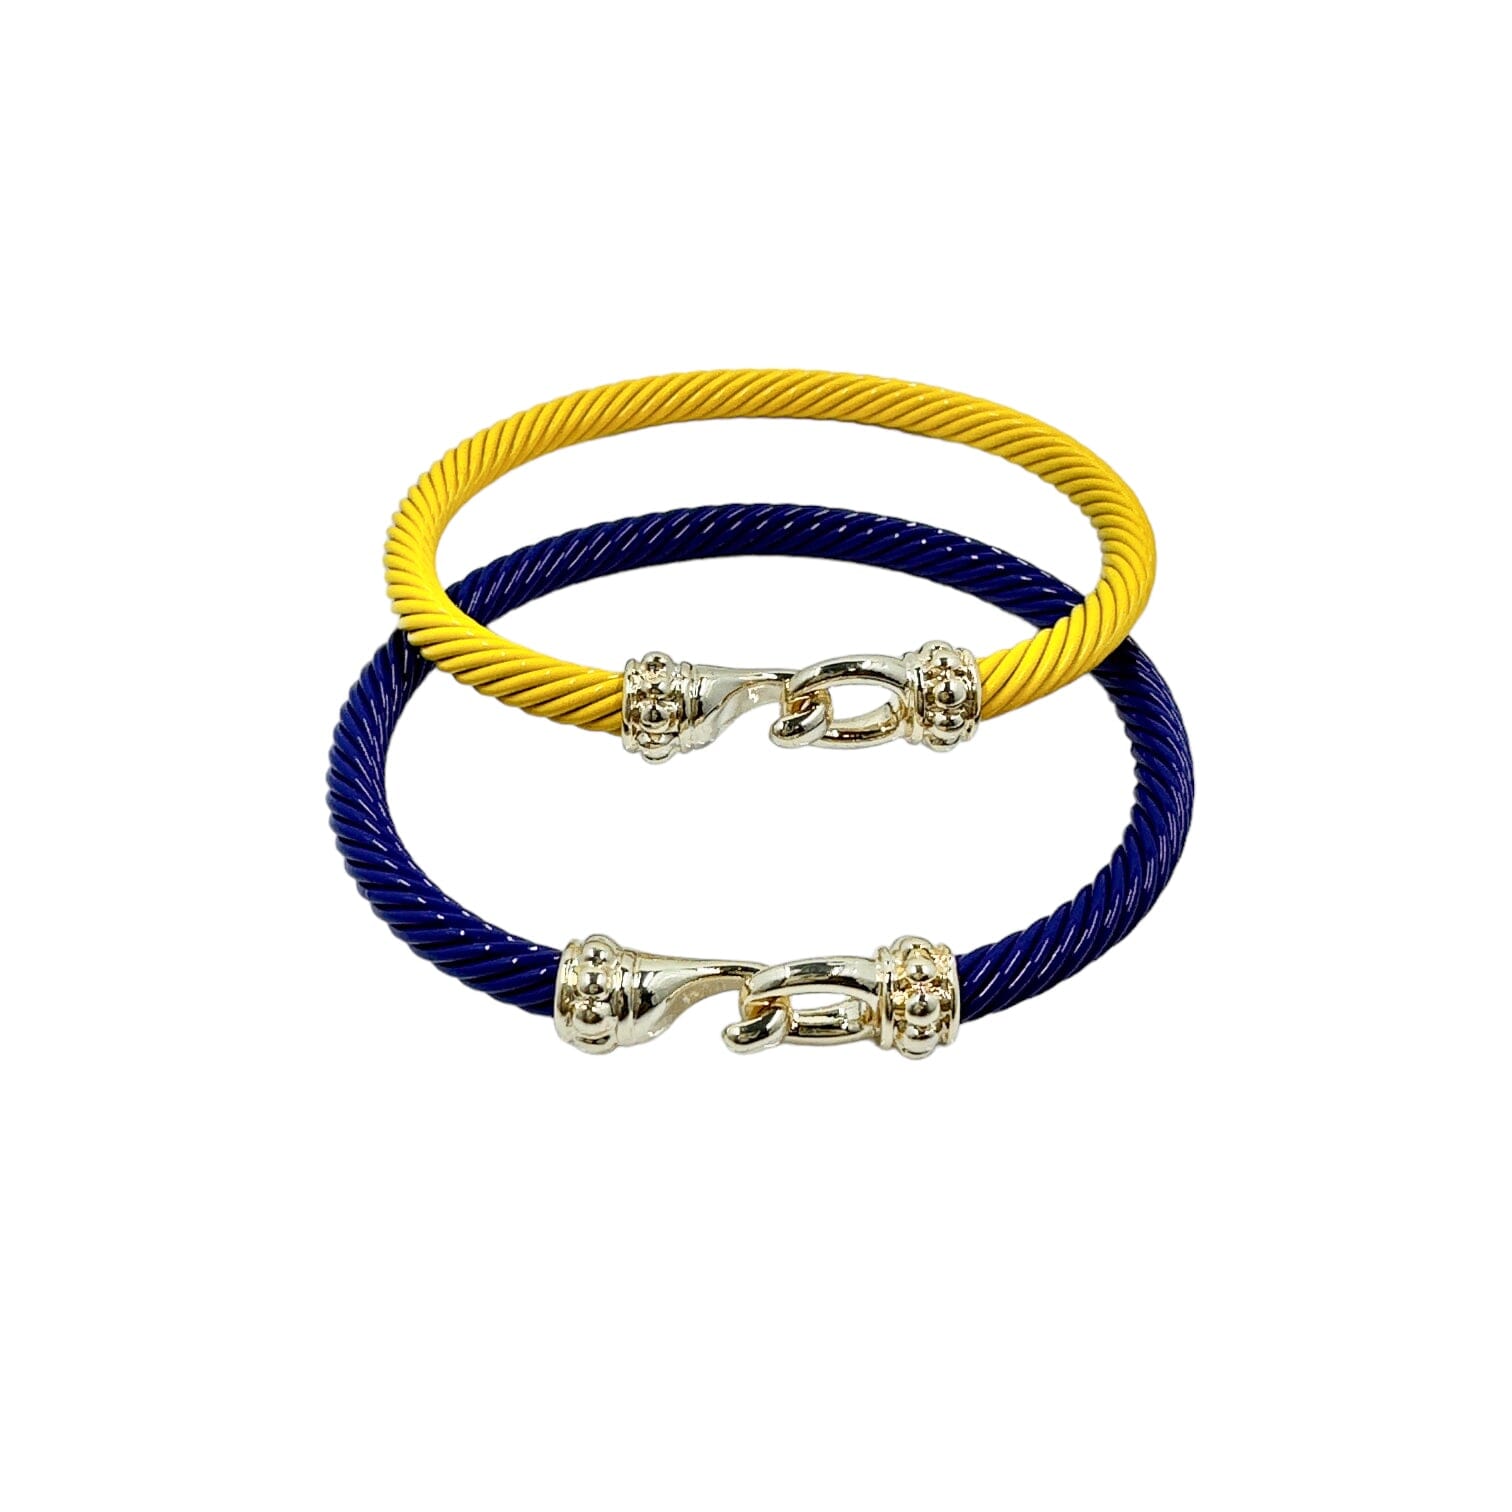 Bella Cable Gold Hook Bracelet Blue and Yellow | Throne Gift Store